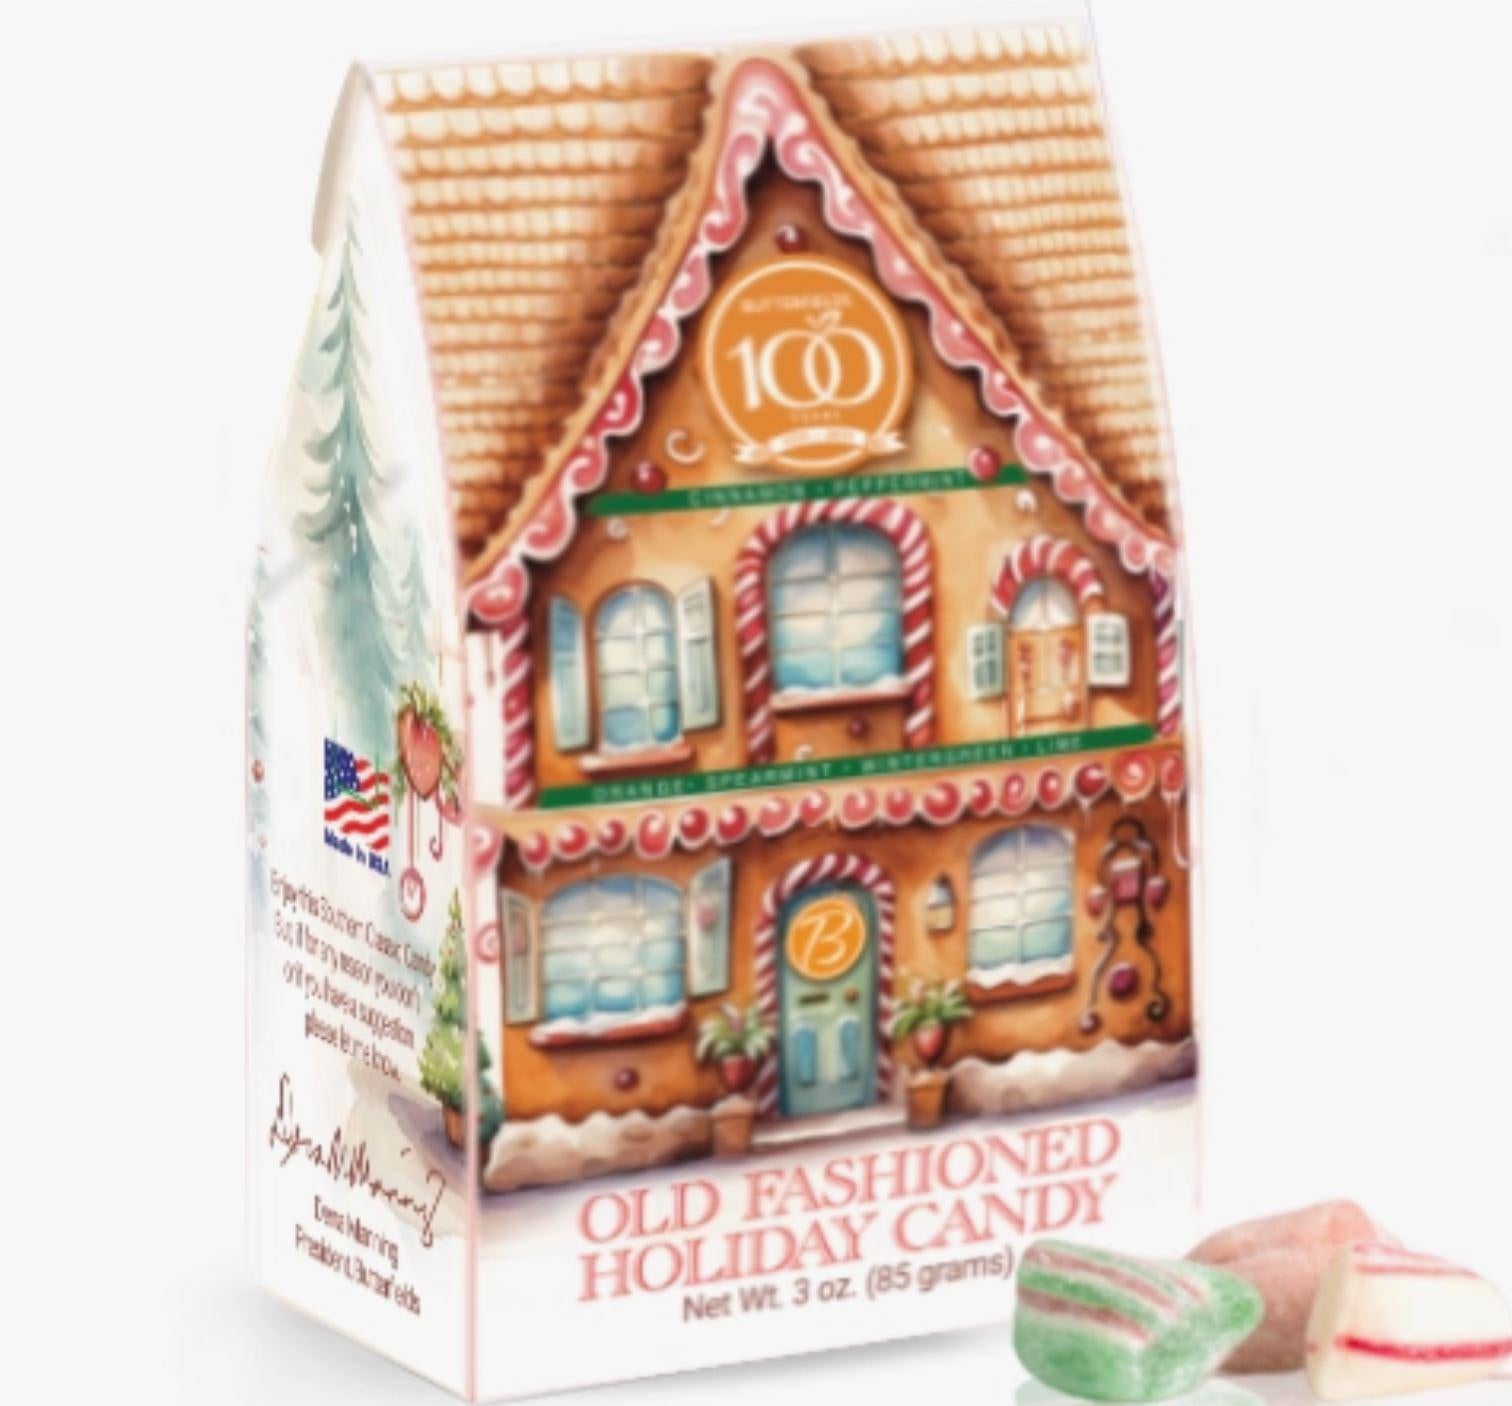 Butterfield's Candy Old Fashioned Holiday Candy